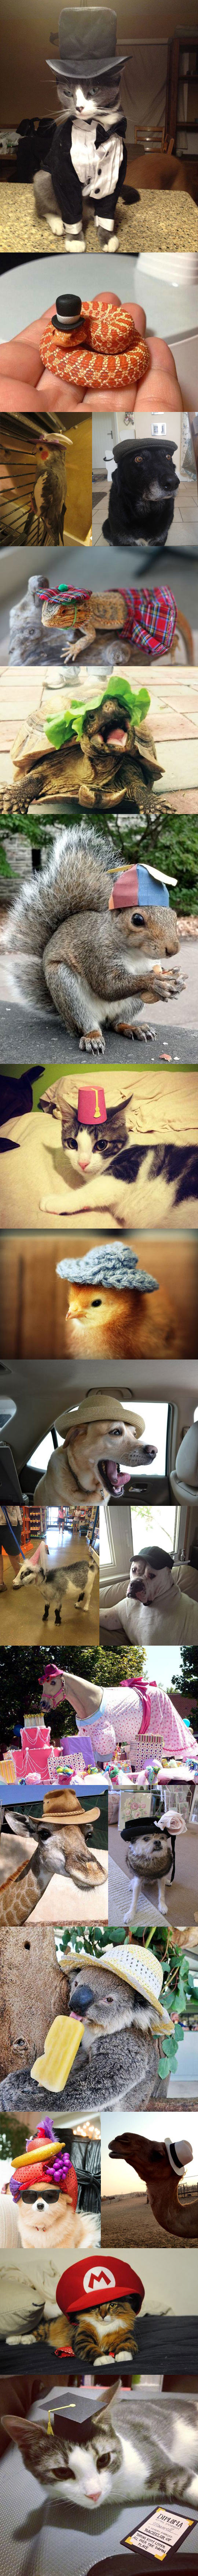 cool-animals-wearing-hats-cat